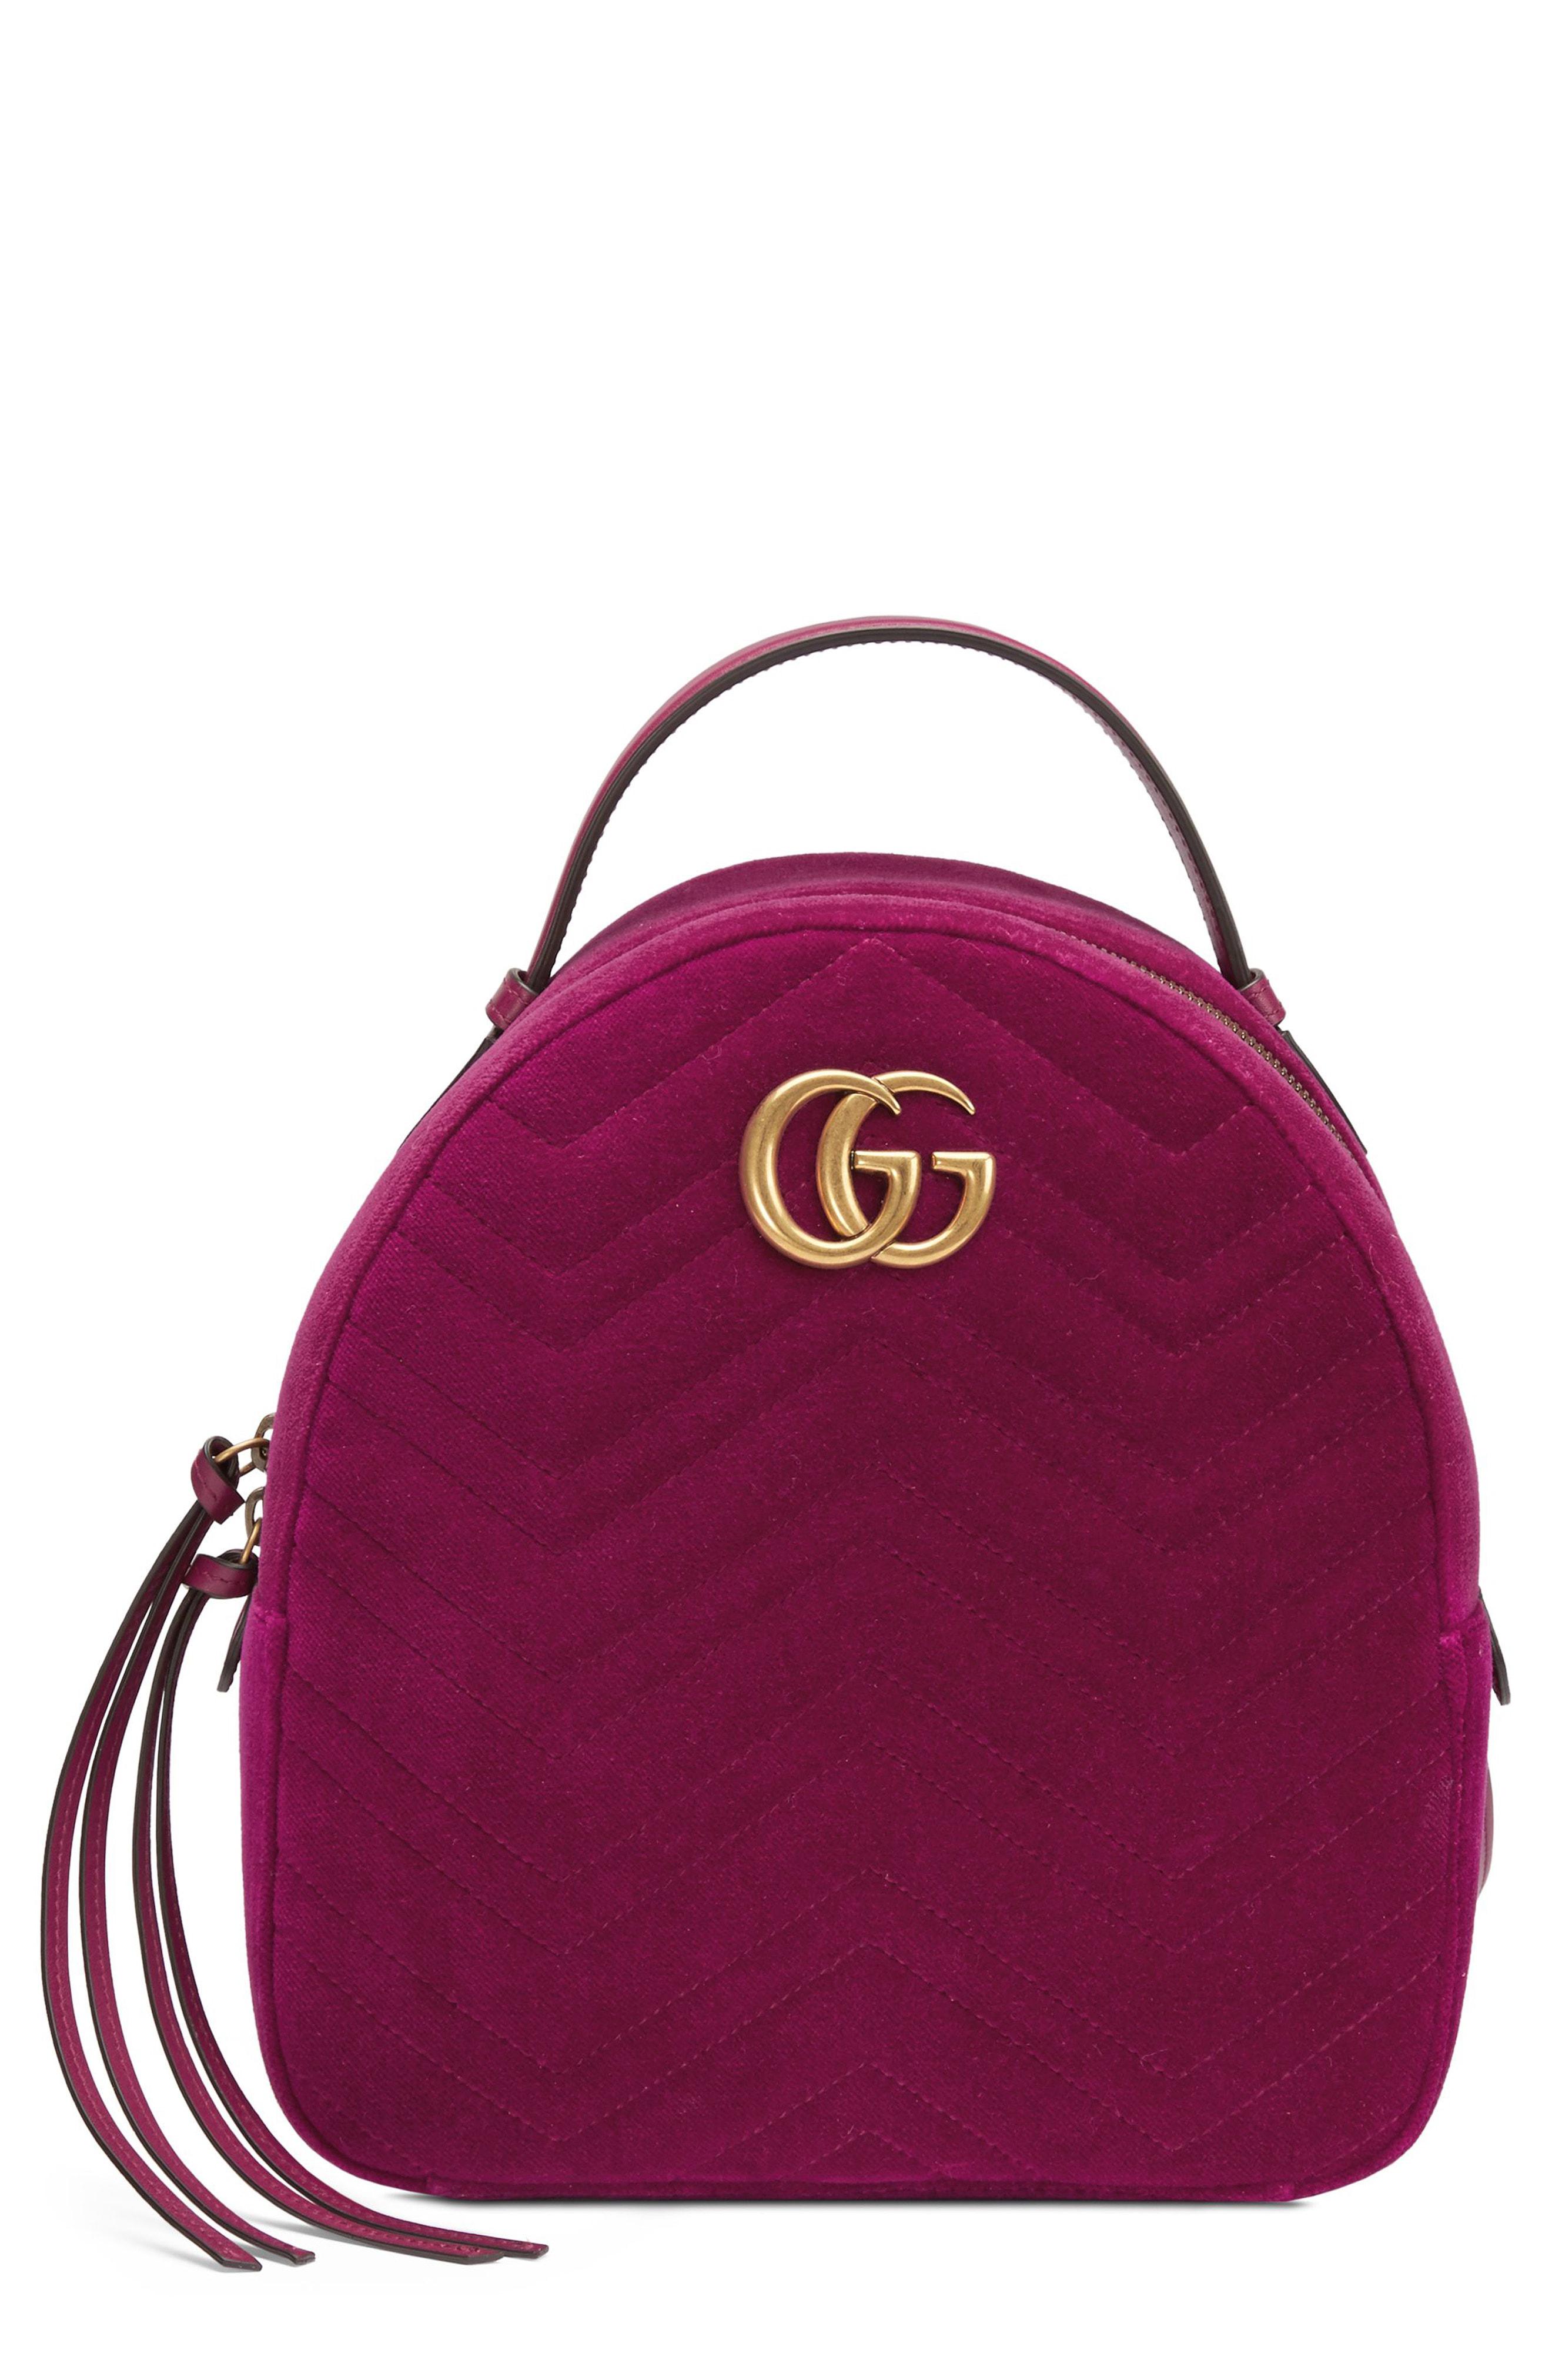 gucci marmont pink backpack